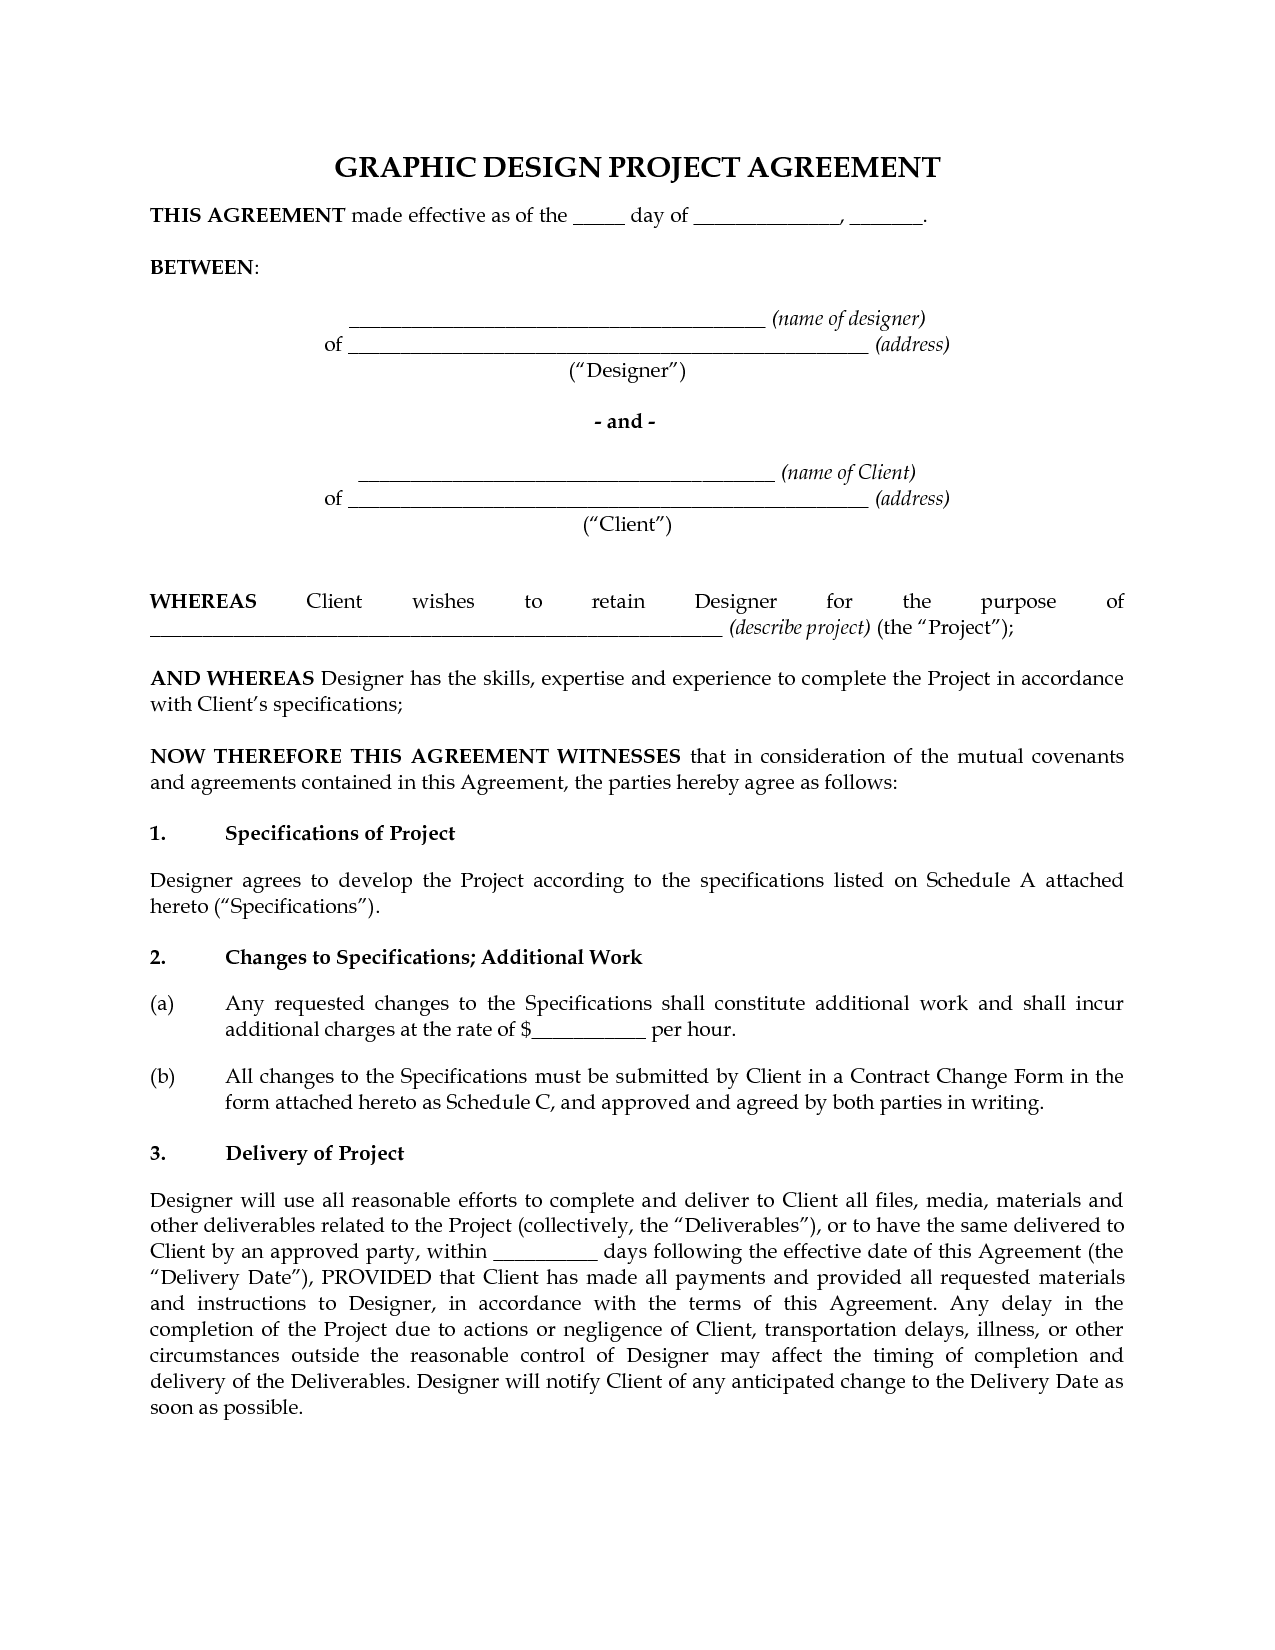 Graphic Design Contract Agreement Template